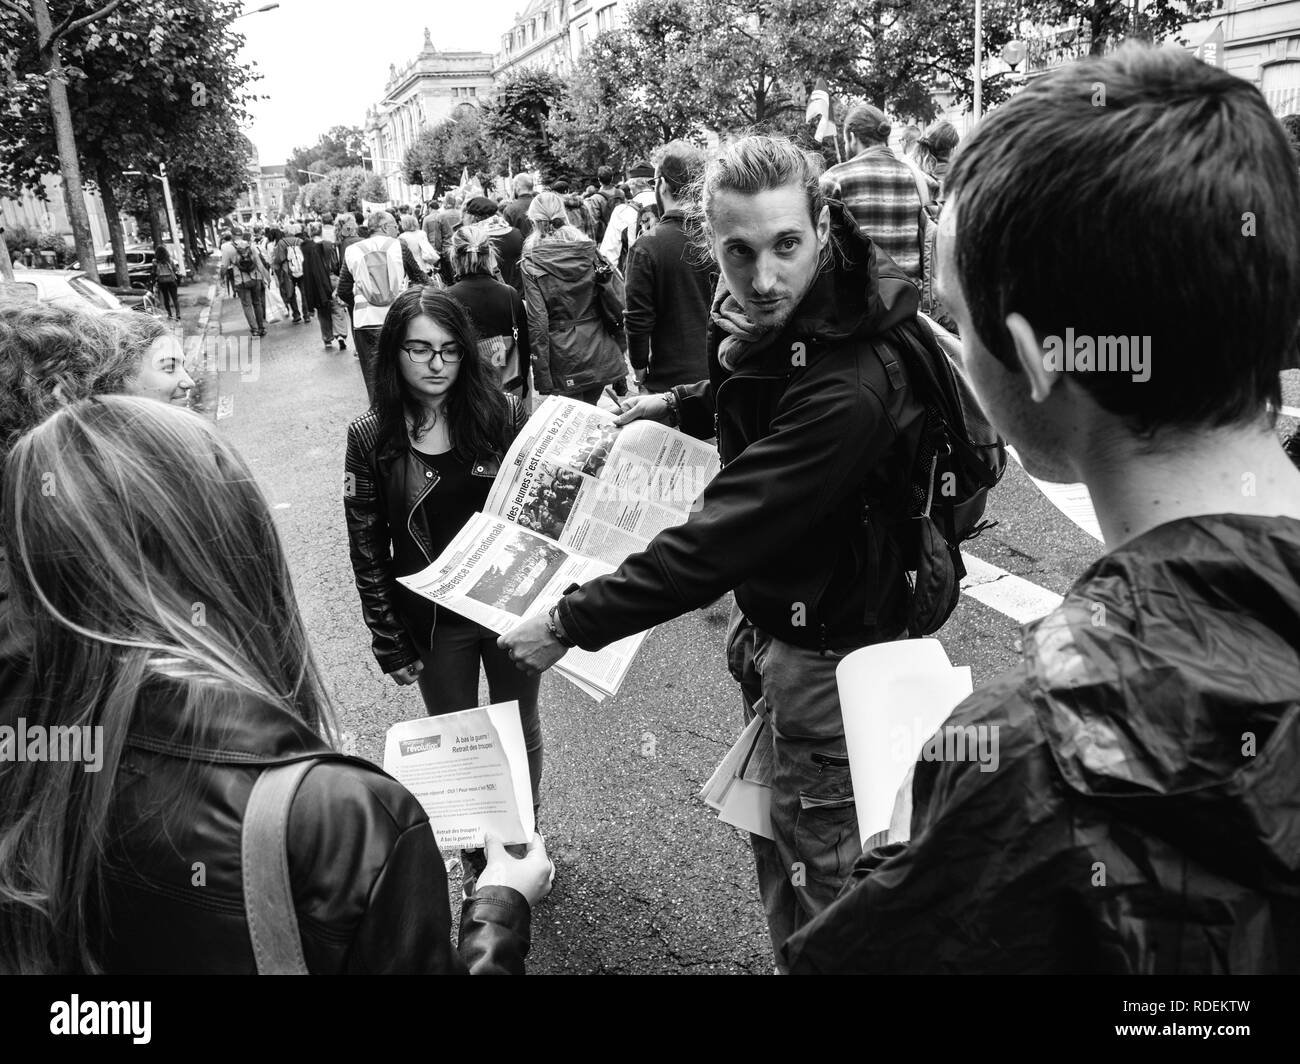 STRASBOURG, FRANCE - SEP 12, 2018: Man distributing manifests flyers newspapers during a French Nationwide day of protest against labor reform proposed by Emmanuel Macron Government Stock Photo